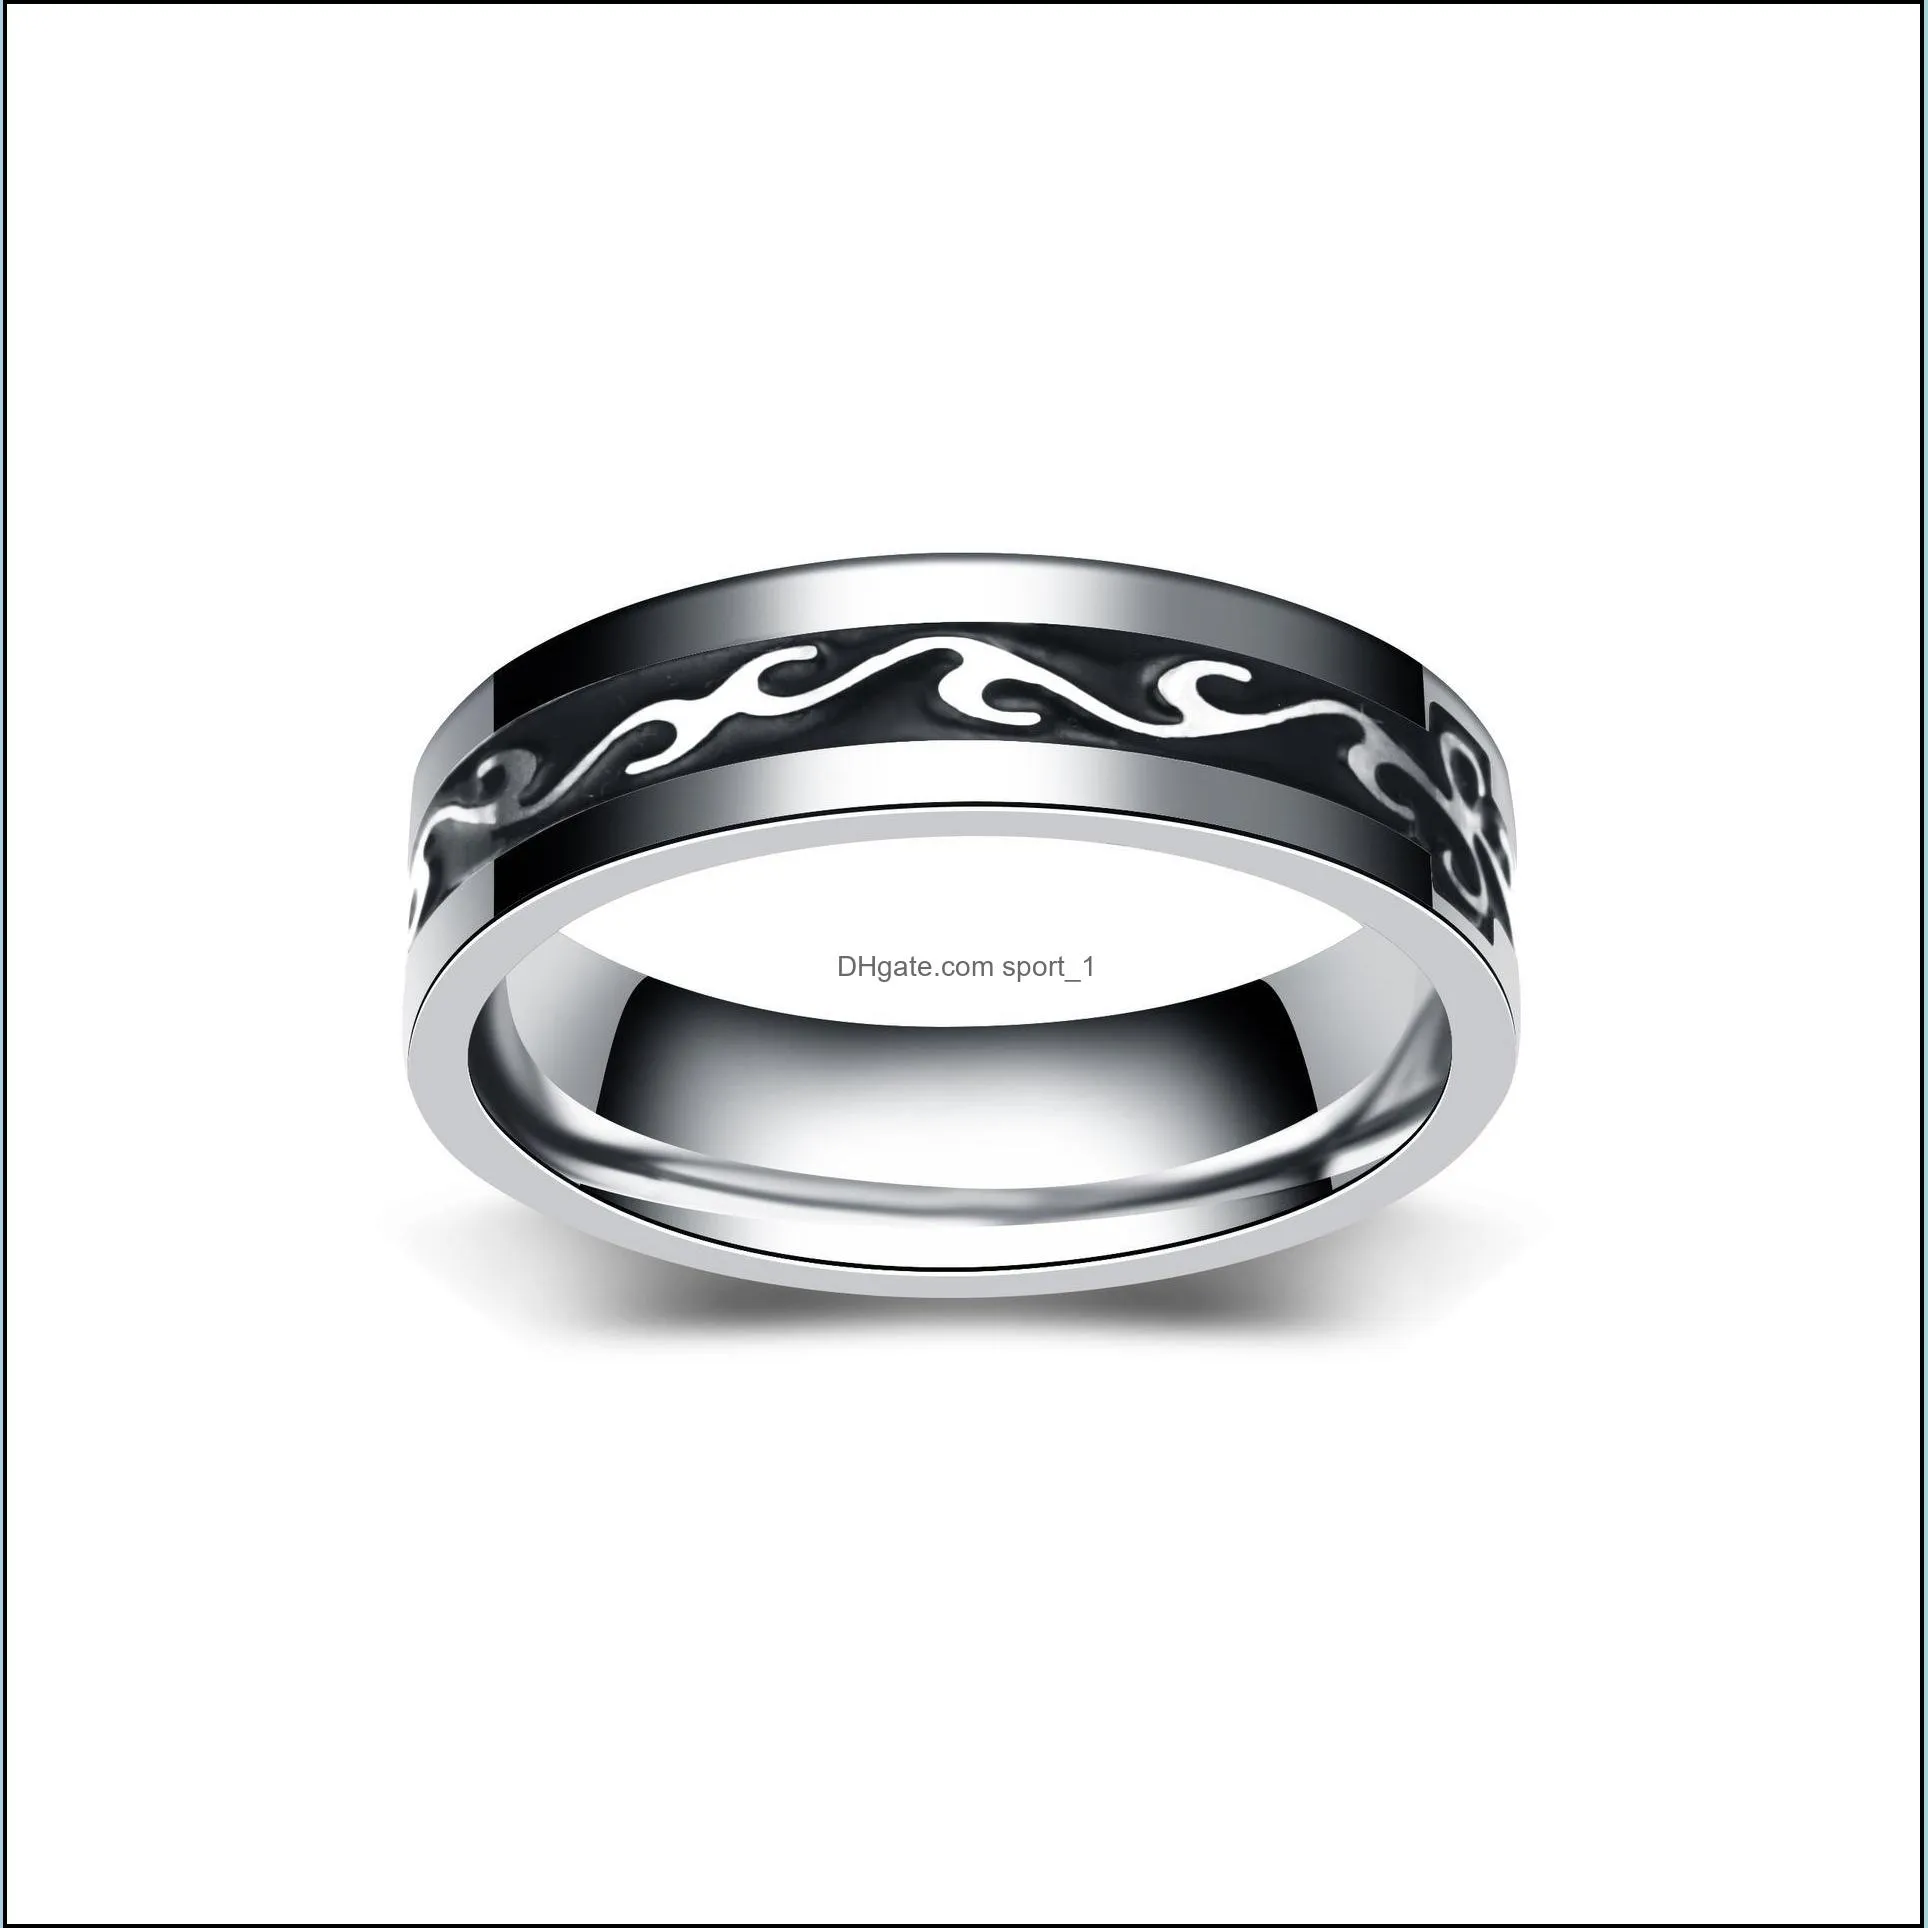 dragon band rings stainless steel black for men women fashion jewelry gift